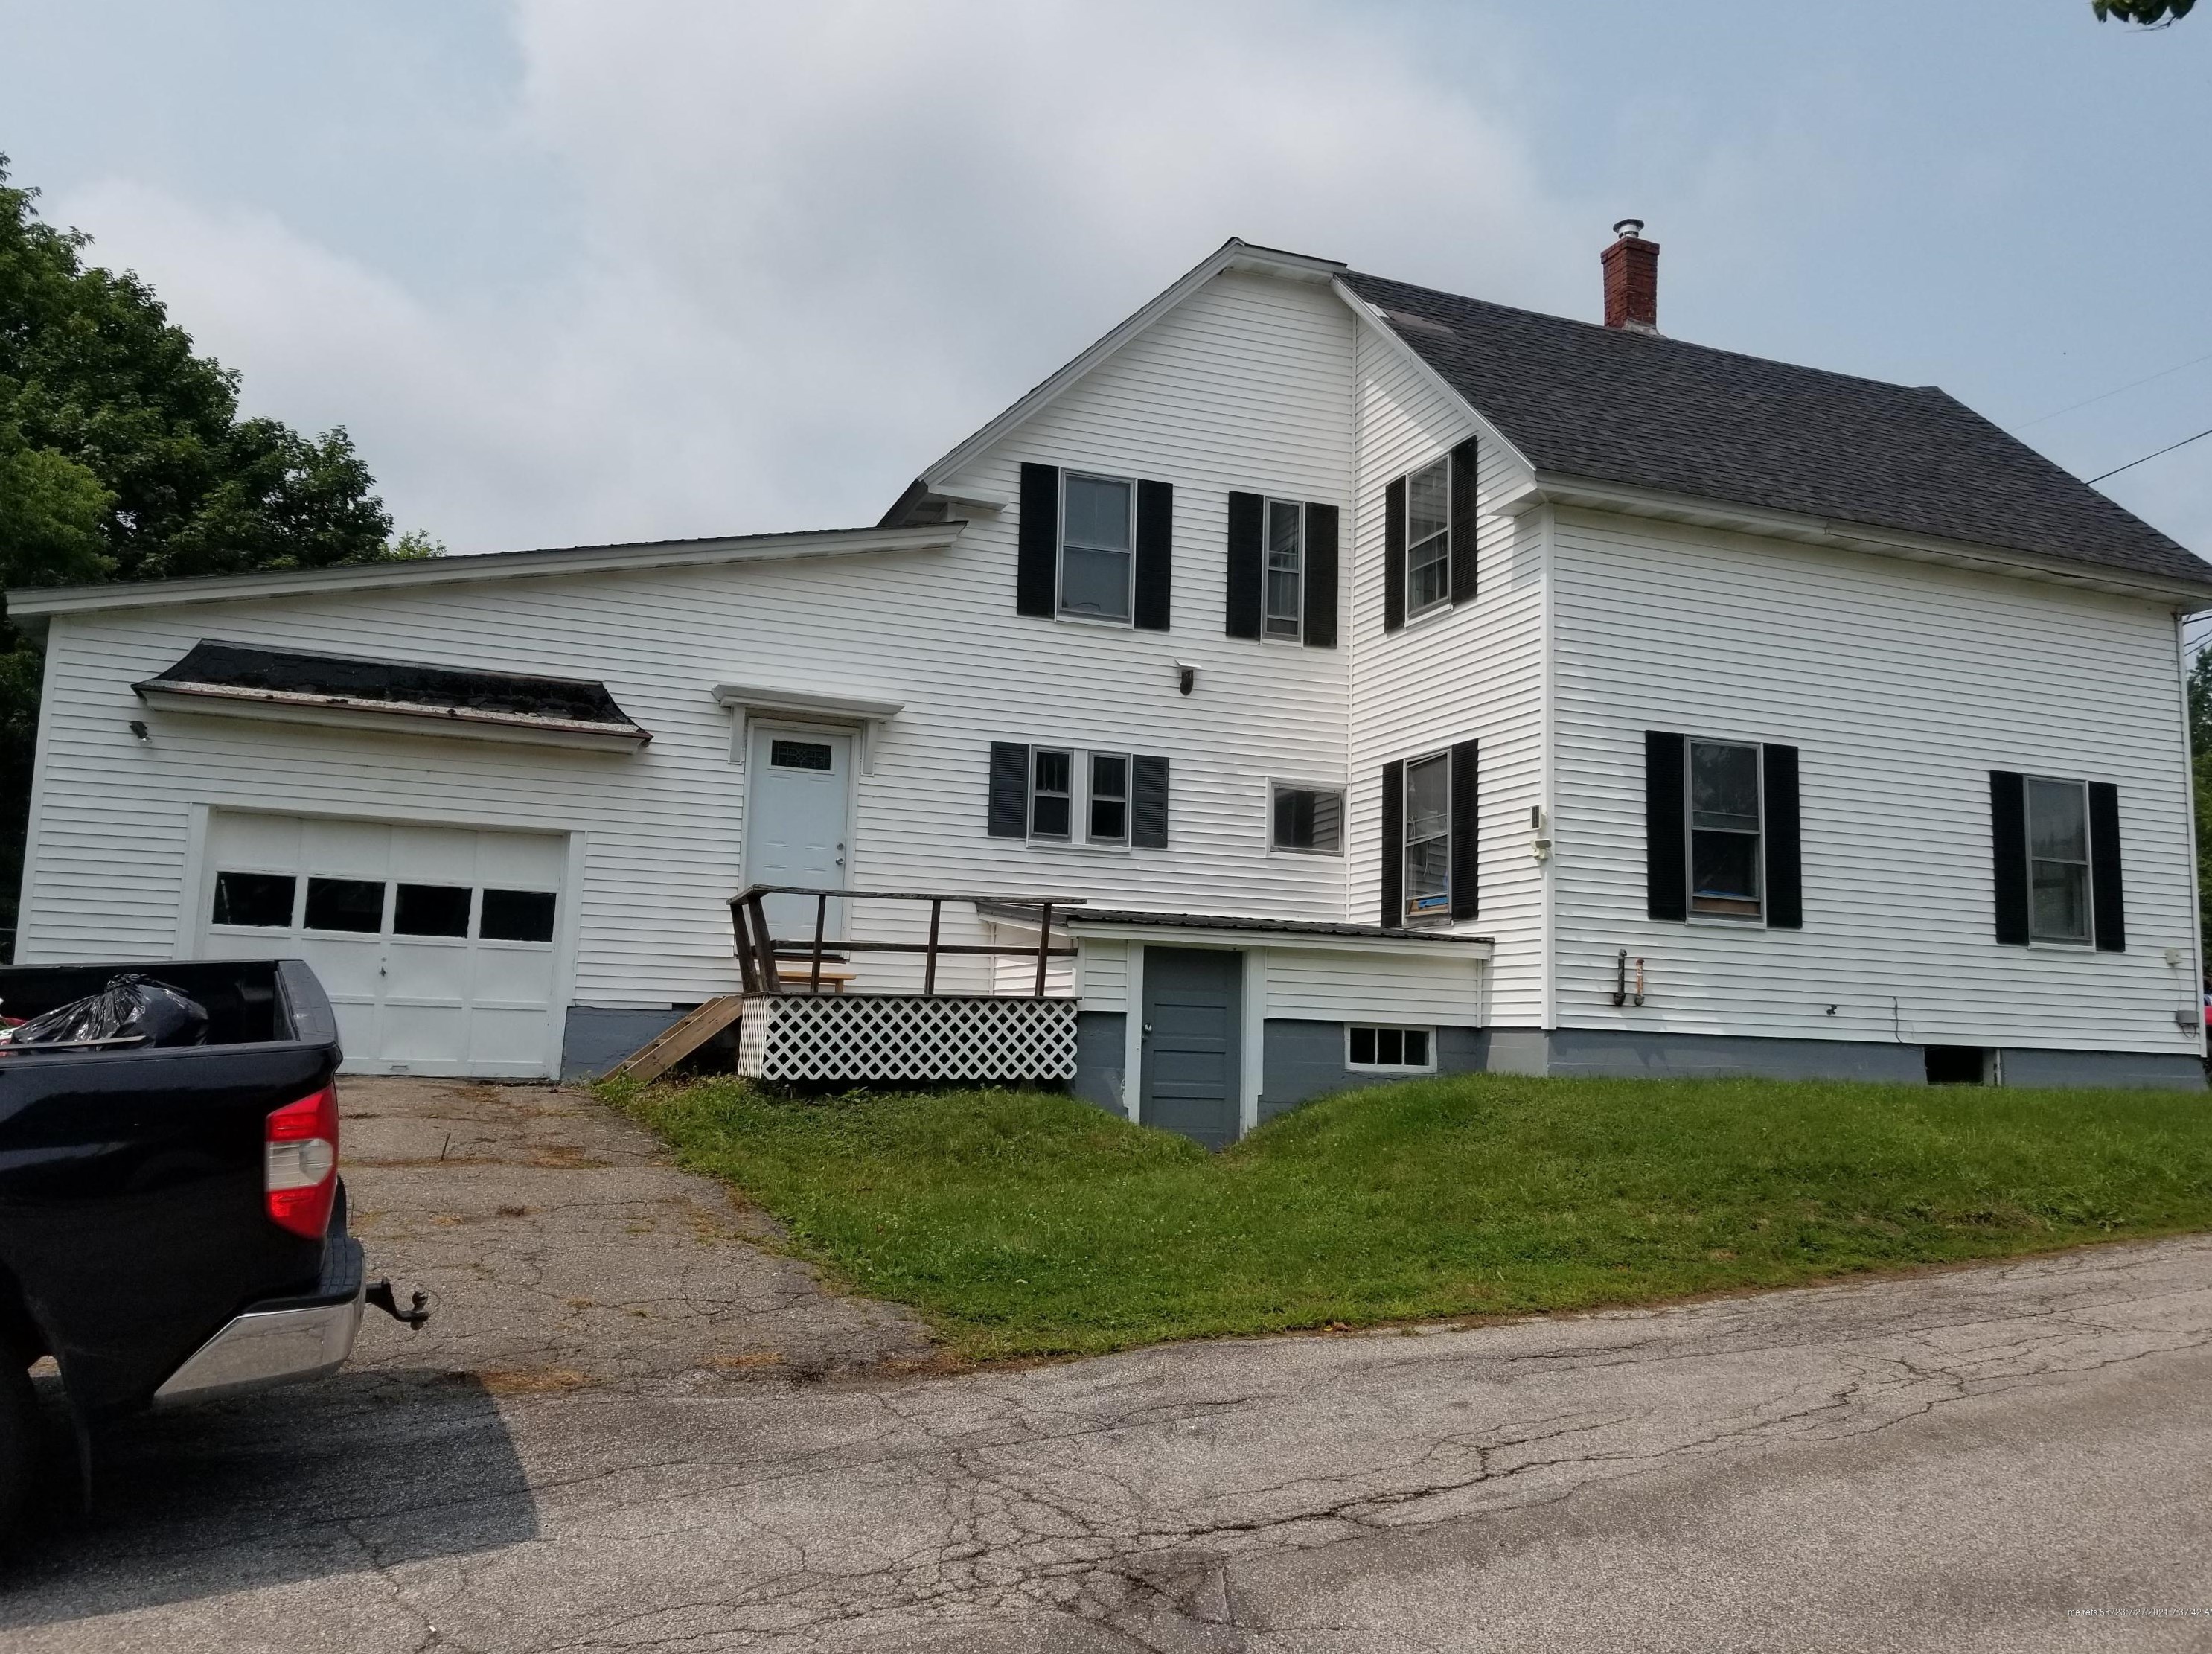 63 Bodwell St, Old Town, ME 04468